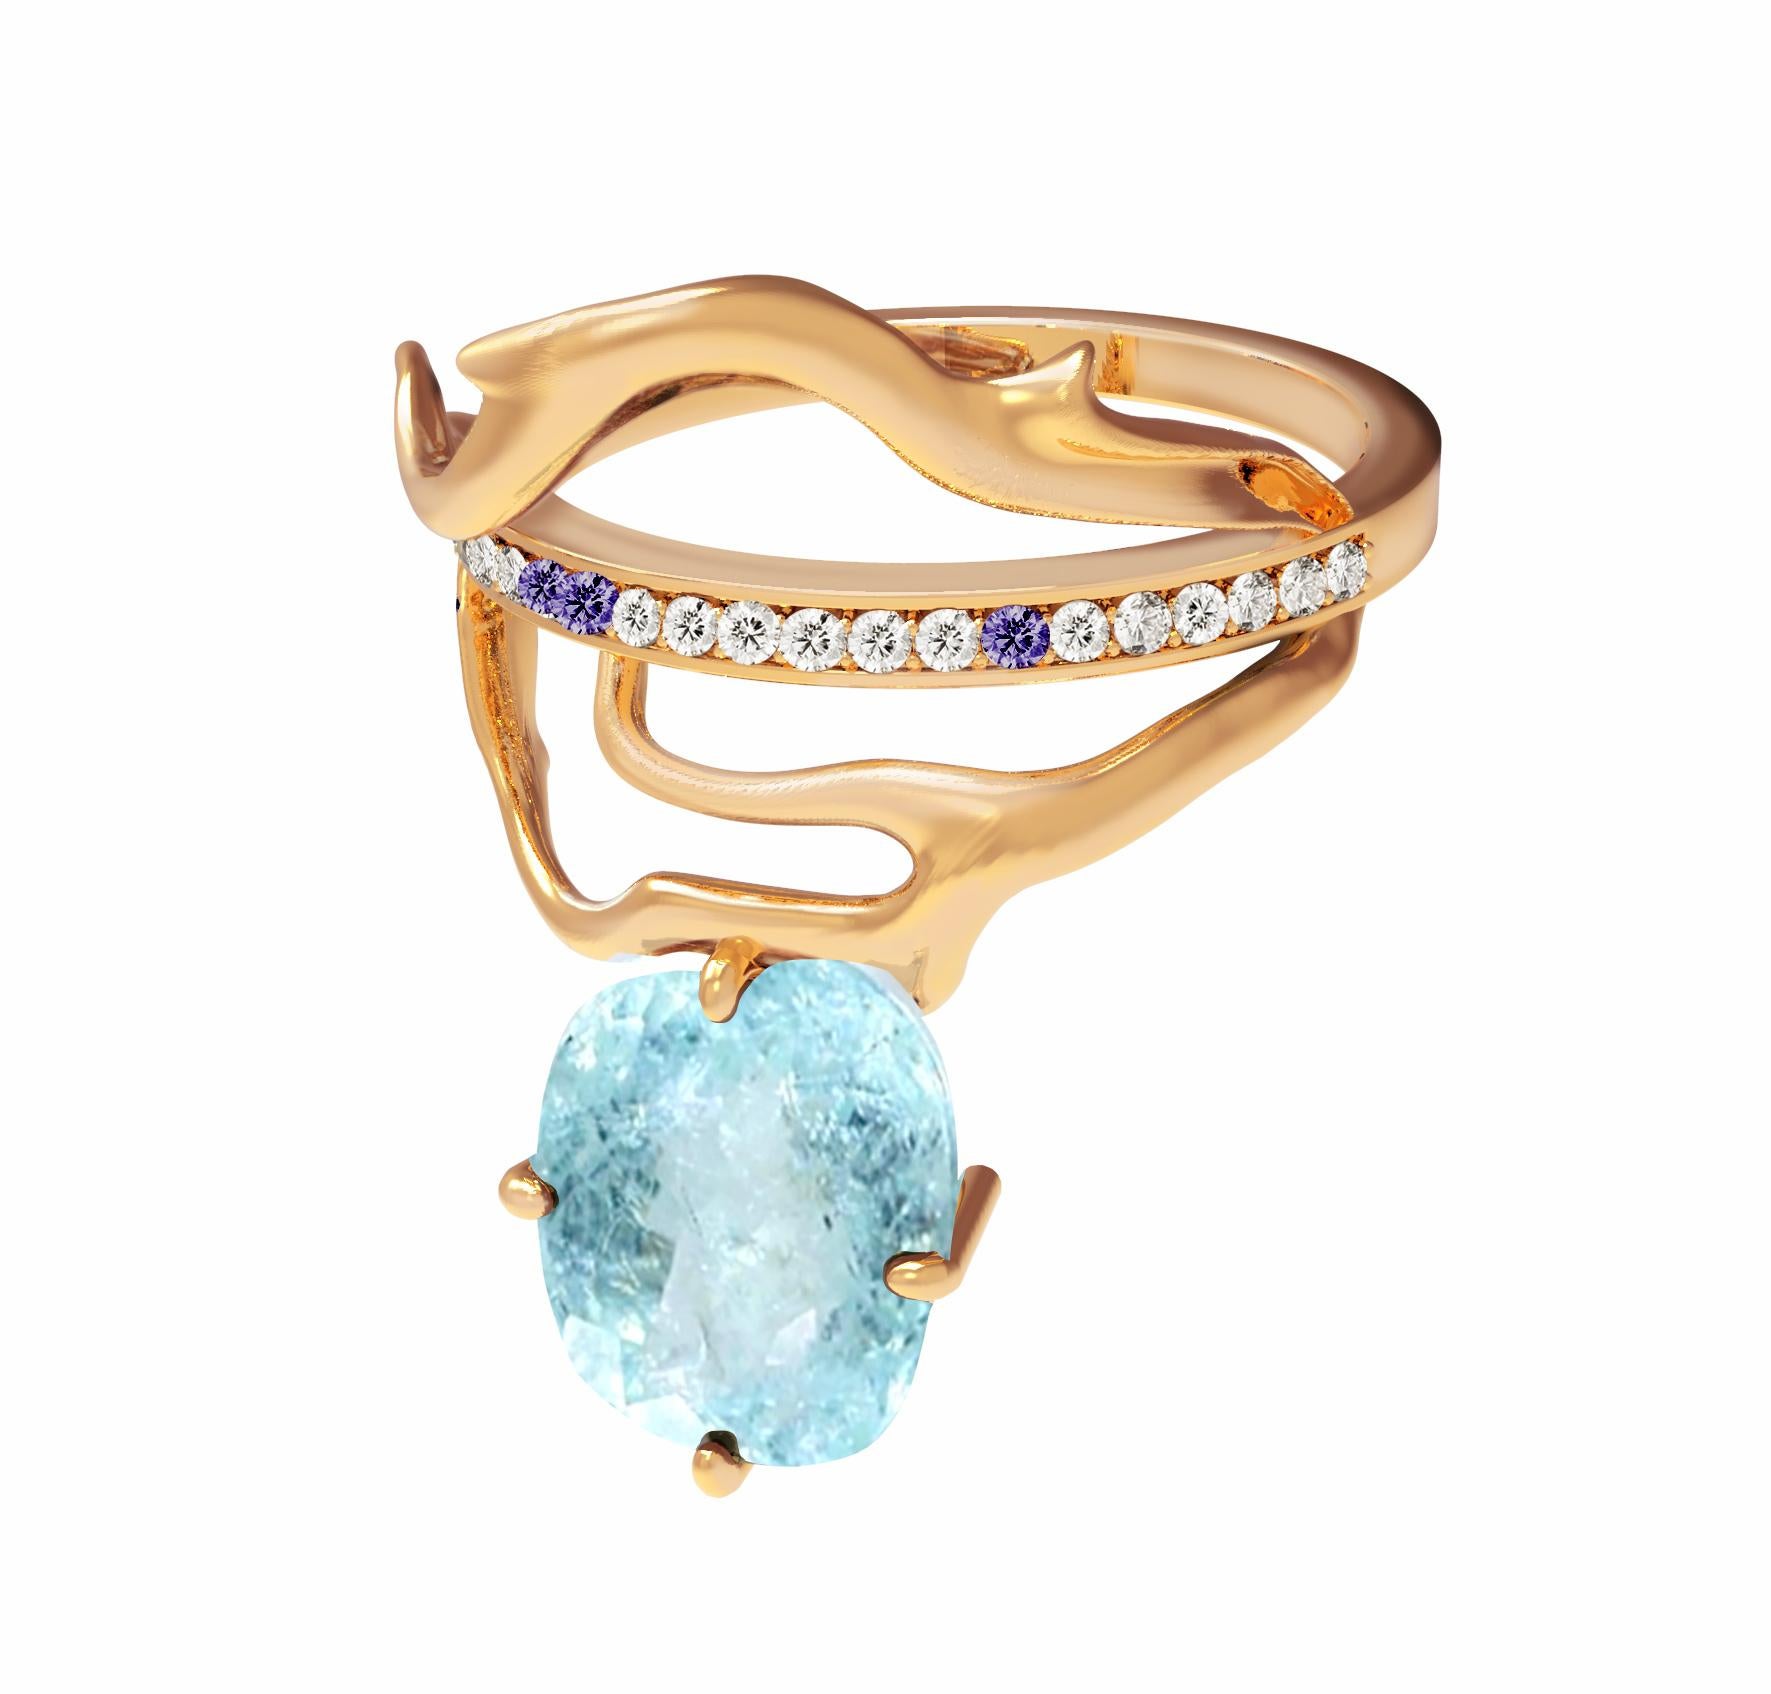 This Tibetan 18 karat yellow or rose gold contemporary fashion ring is encrusted with diamonds, amethysts and oval cut paraiba tourmaline  (neon copper bearing, 2,4 carats, blue with inclusions). Size is custom made. It can be ordered in different